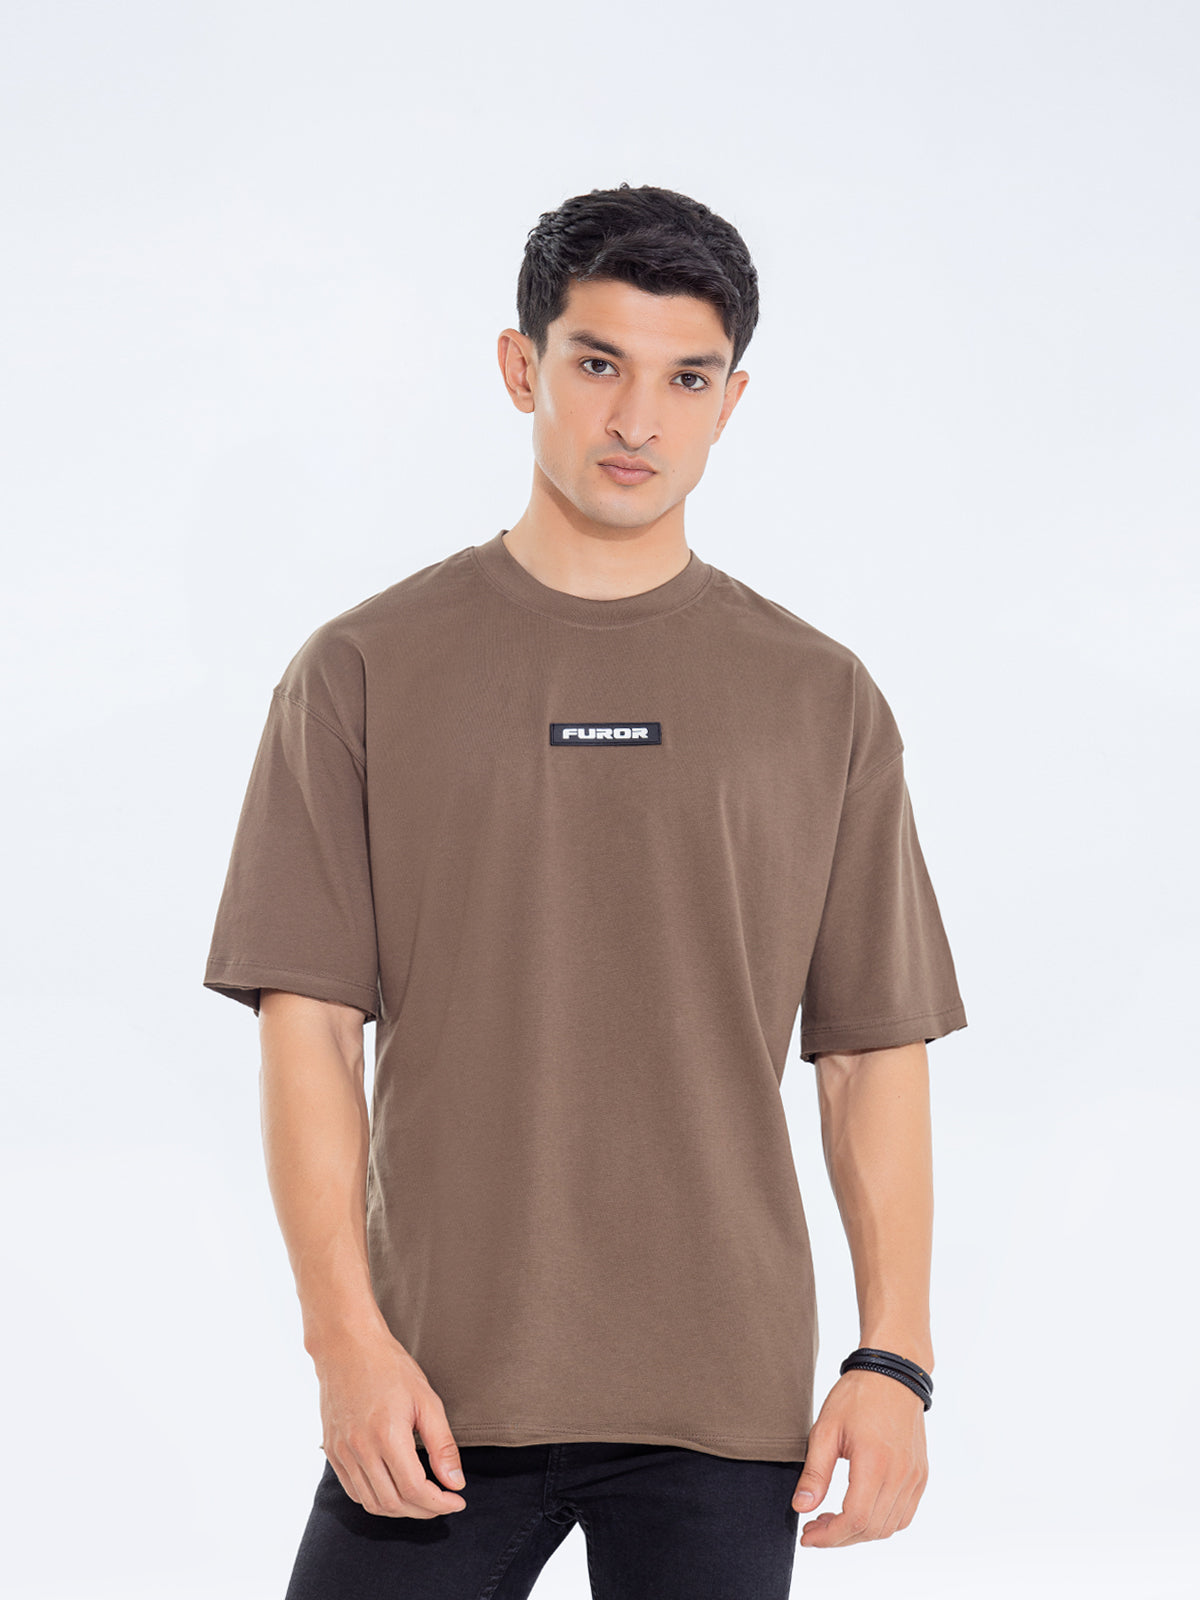 Relaxed Fit Crew Neck Basic Tee - FMTBL24-021